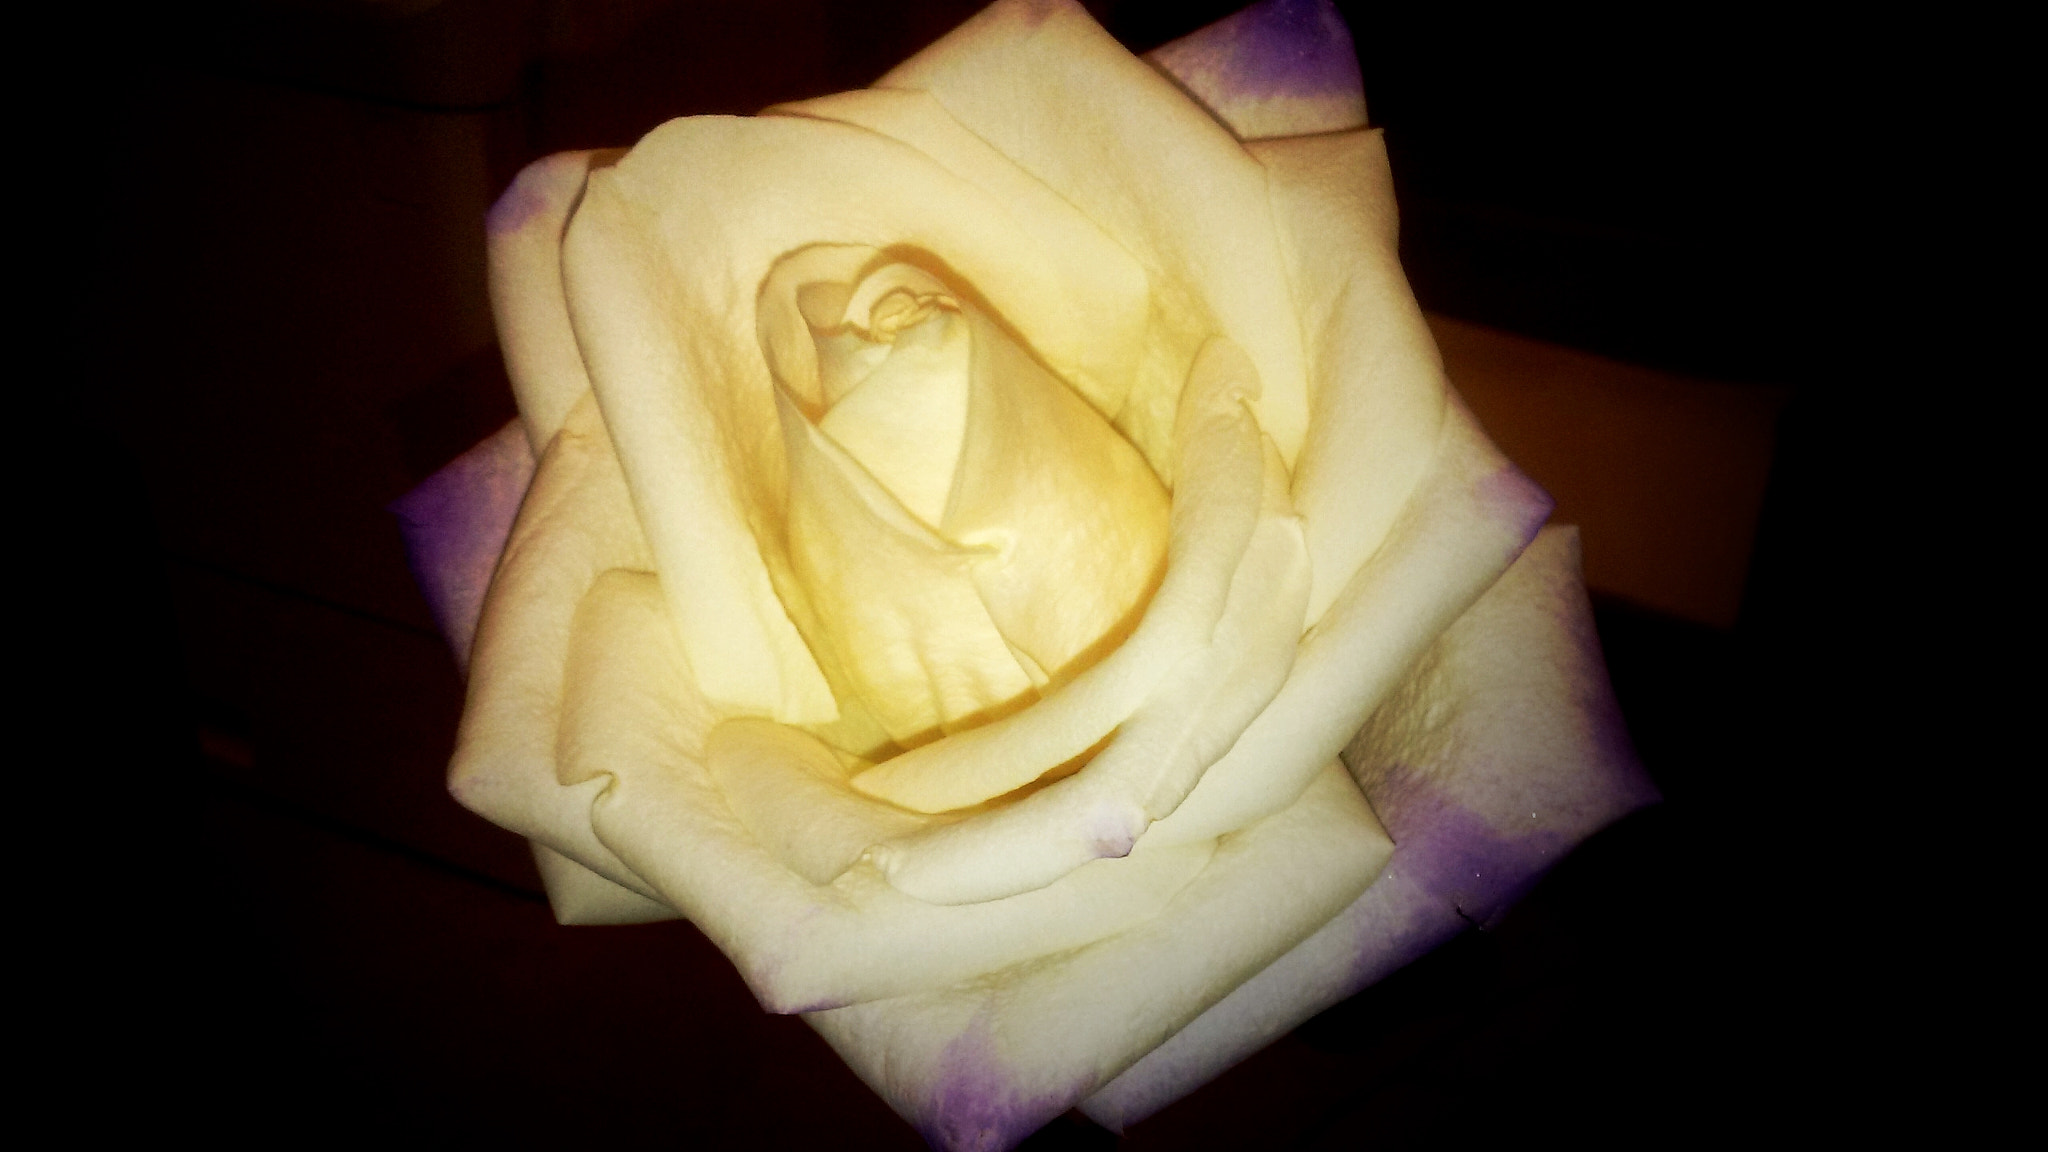 LG TREASURE sample photo. Unexpected rose photography